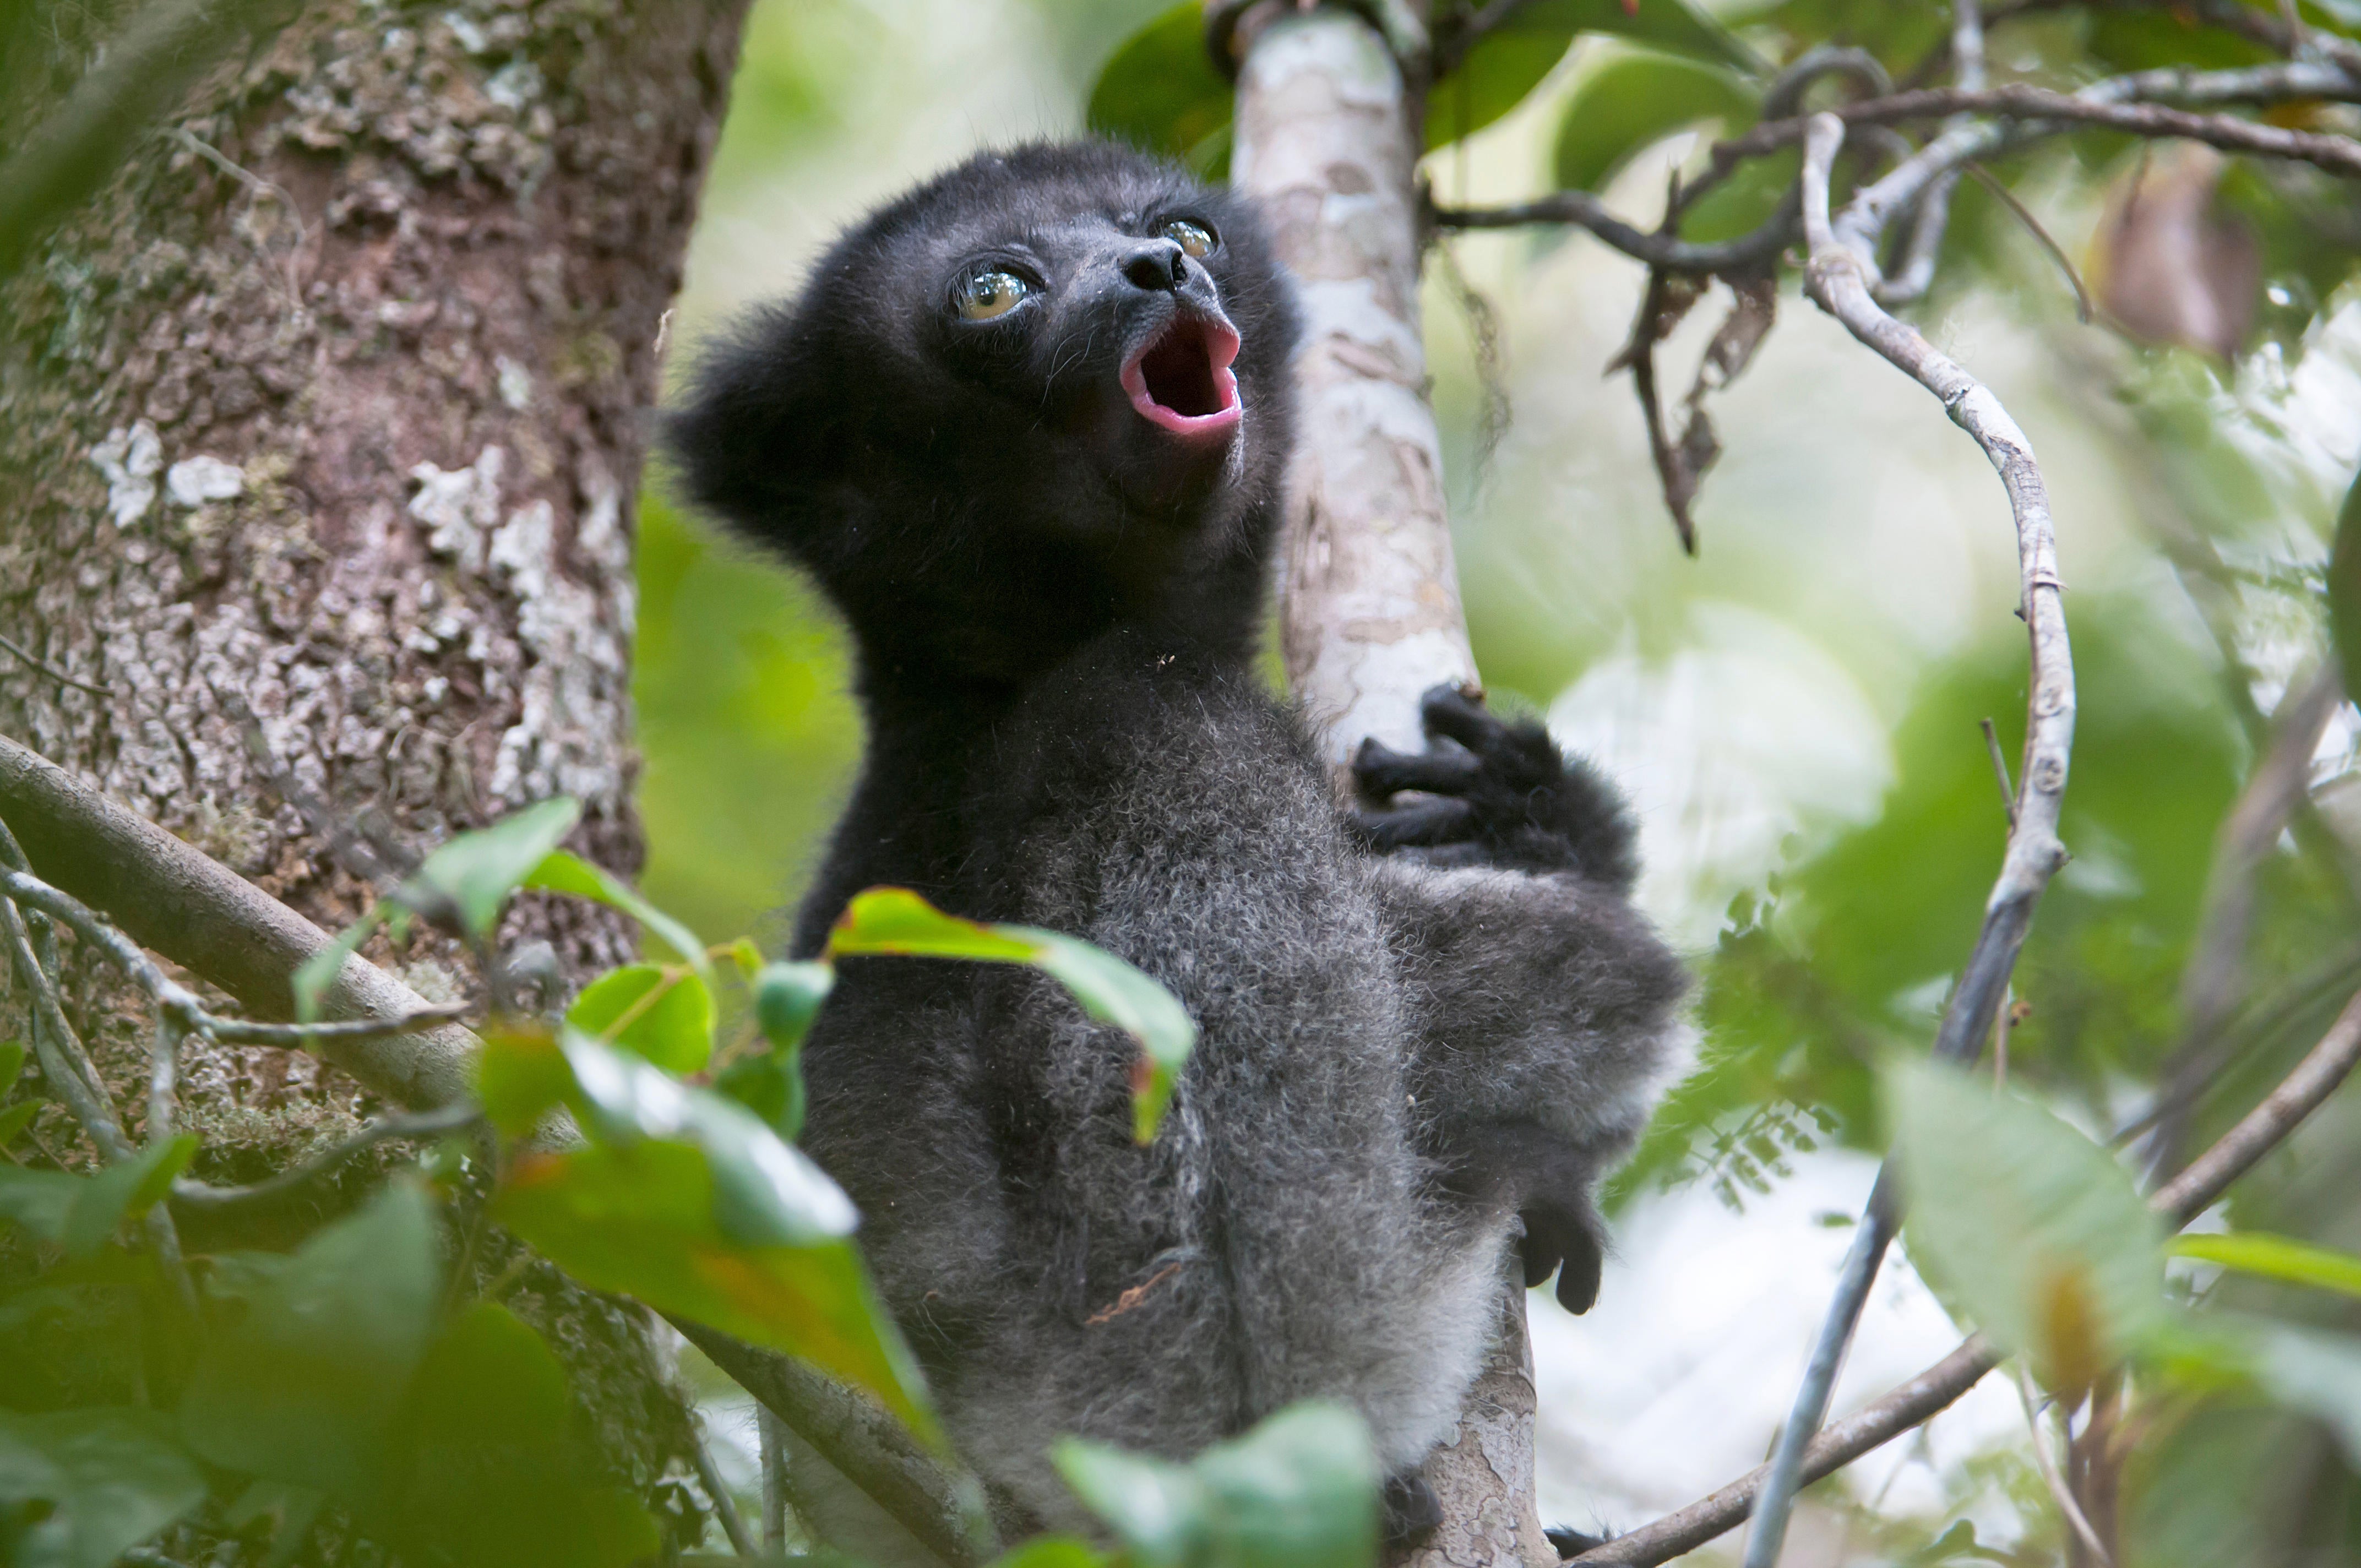 A two-month old indri.